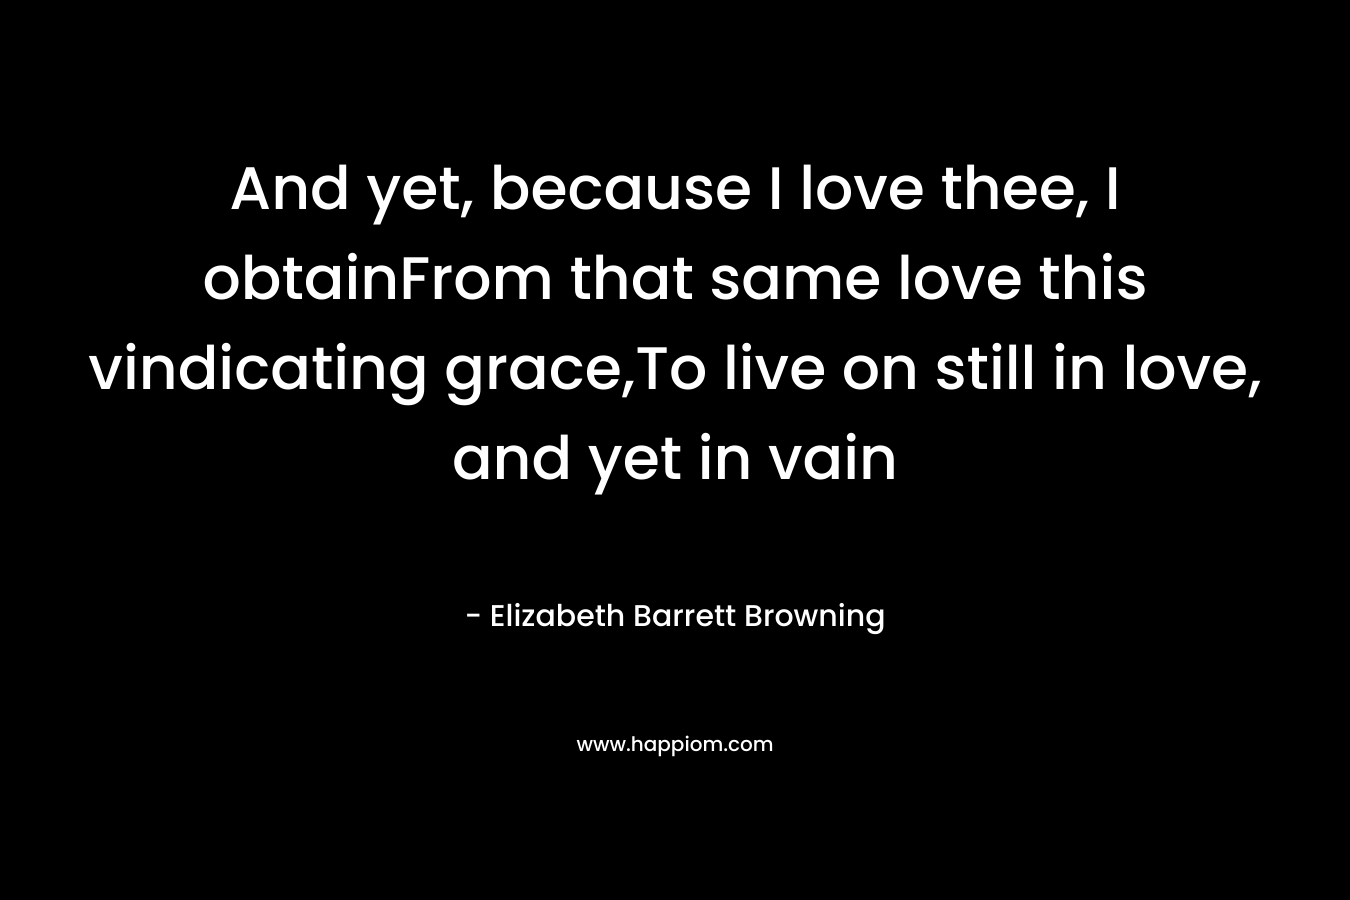 And yet, because I love thee, I obtainFrom that same love this vindicating grace,To live on still in love, and yet in vain – Elizabeth Barrett Browning